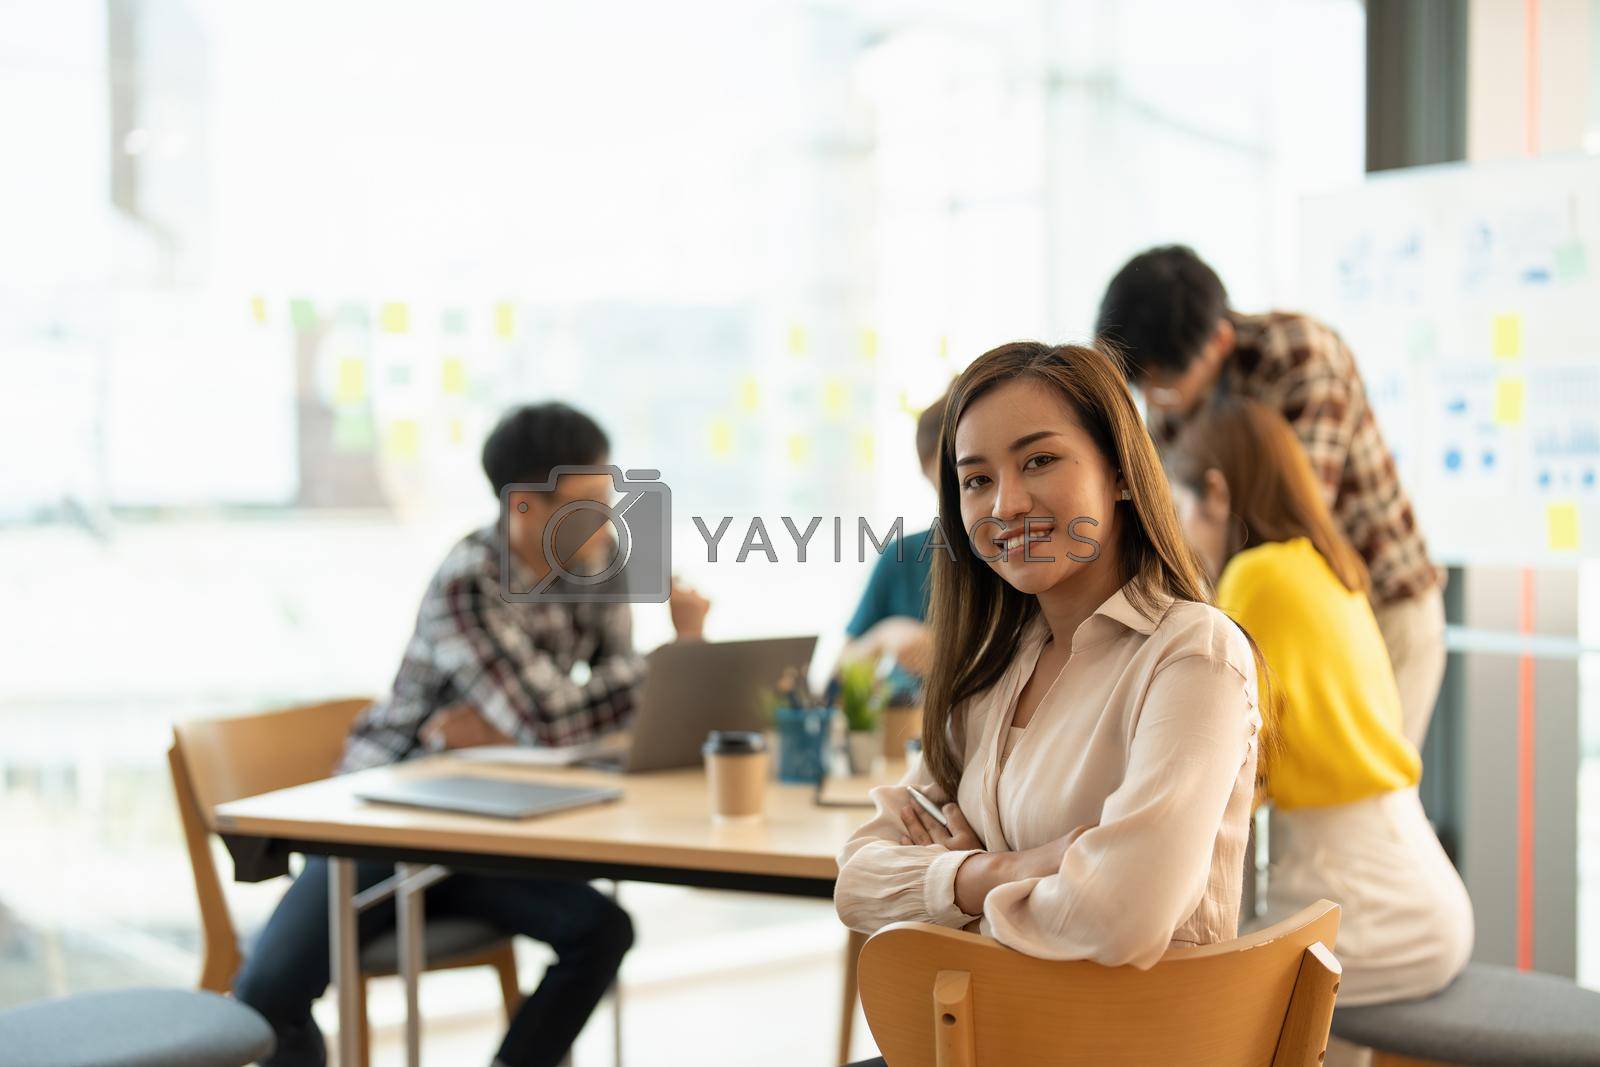 Royalty free image of Attractive young Asian business woman smiling and looking over shoulders at business meeting with co-workers by nateemee